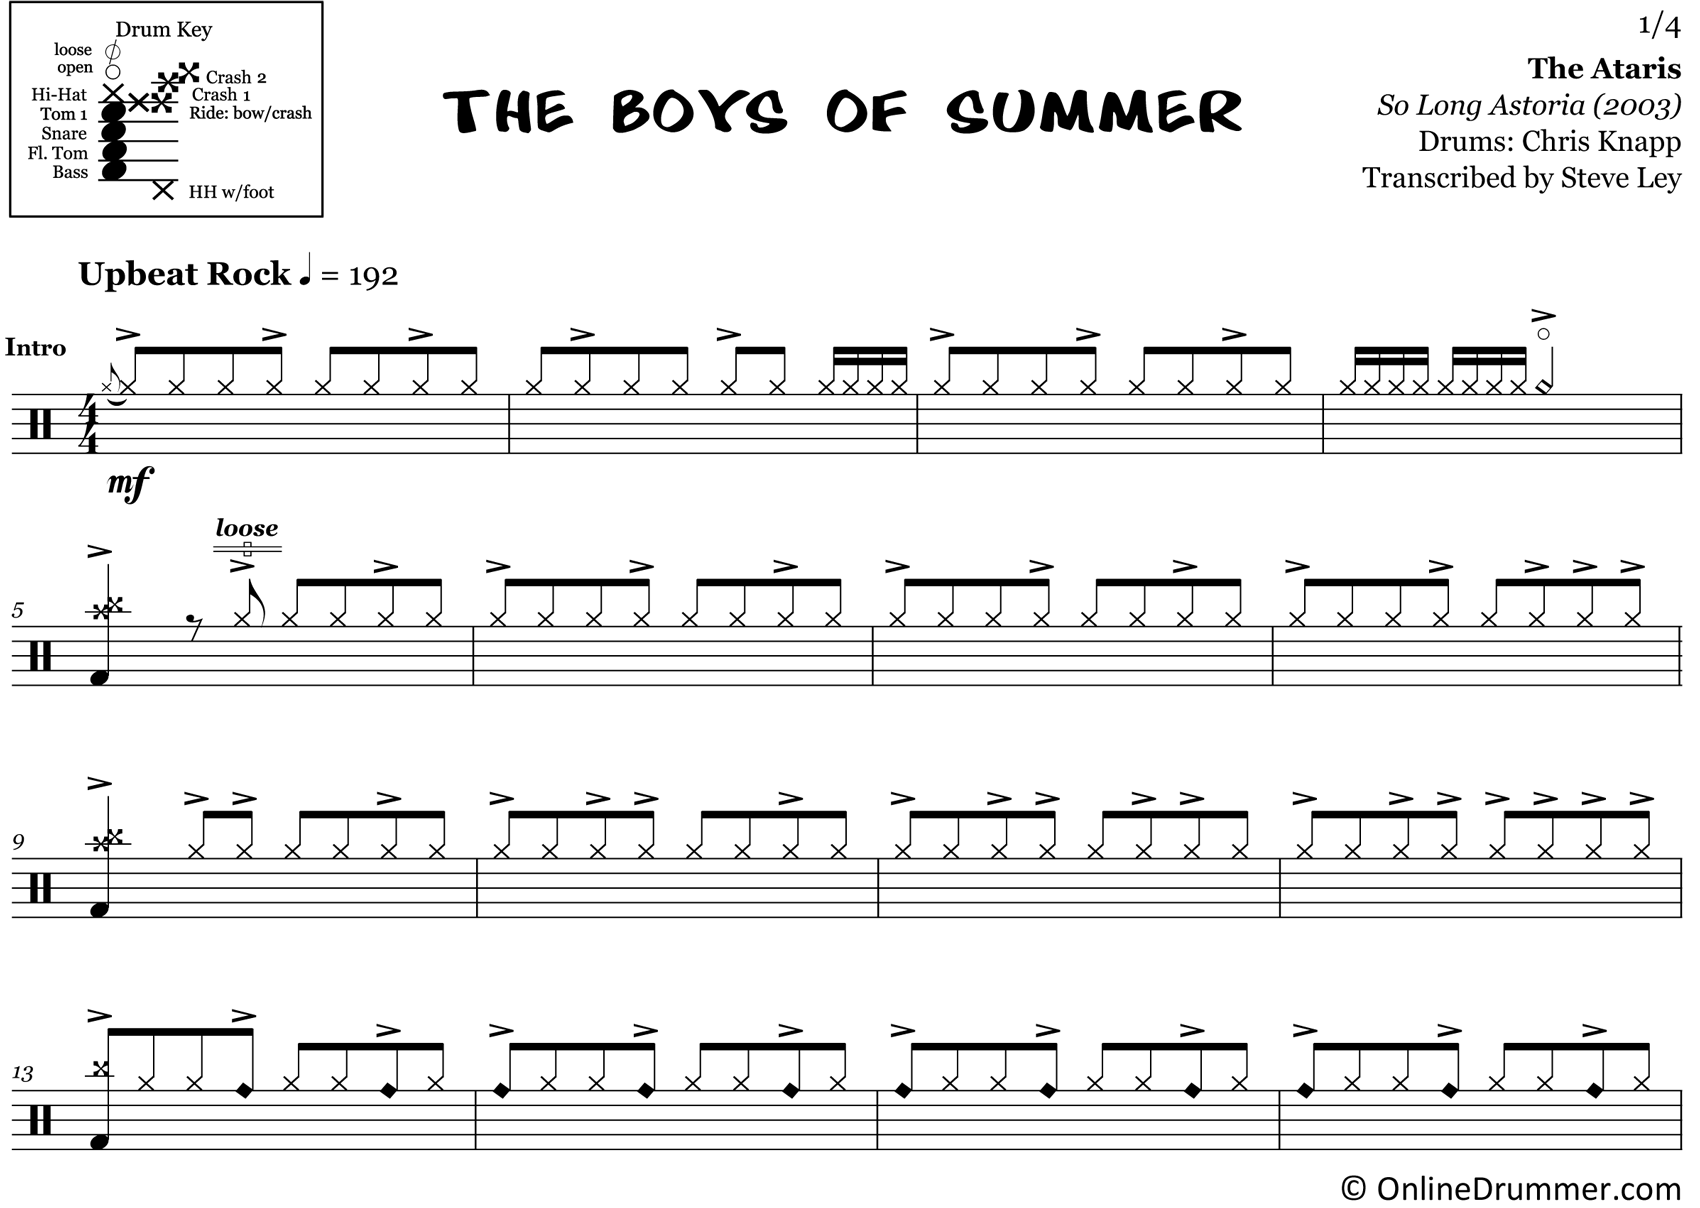 The Boys of Summer - The Ataris - Drum Sheet Music